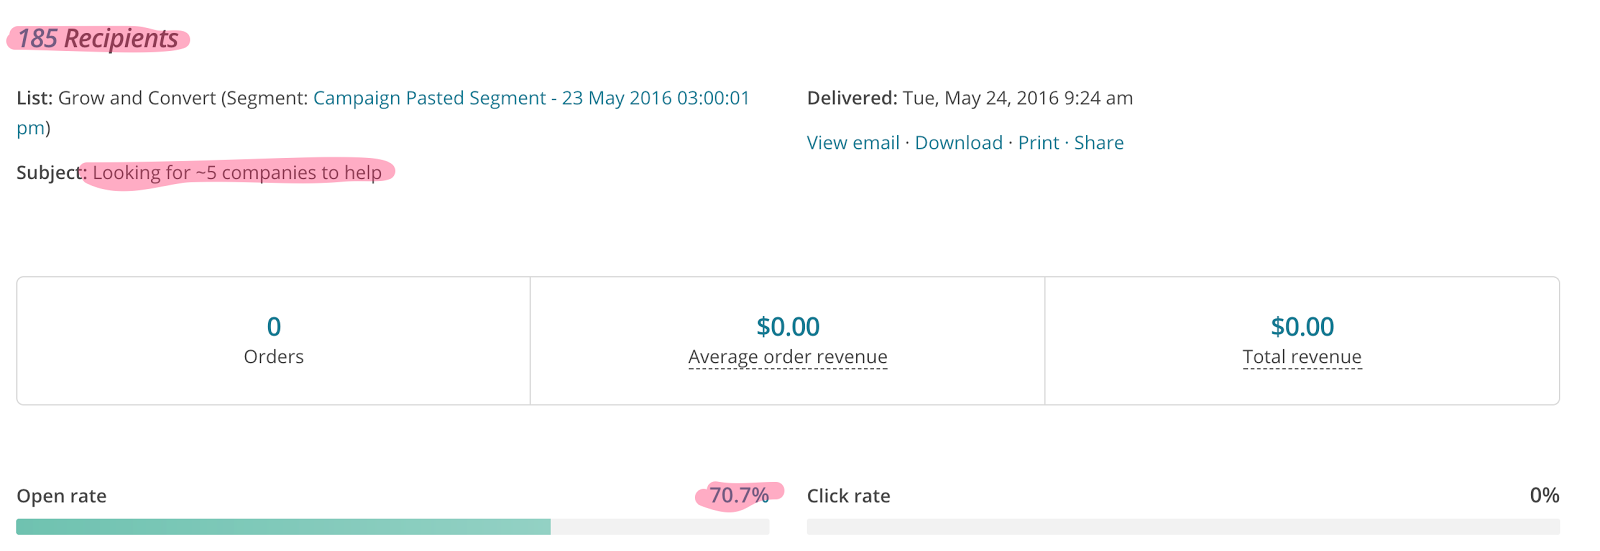 Summary Report for Course Validation  3   MailChimp